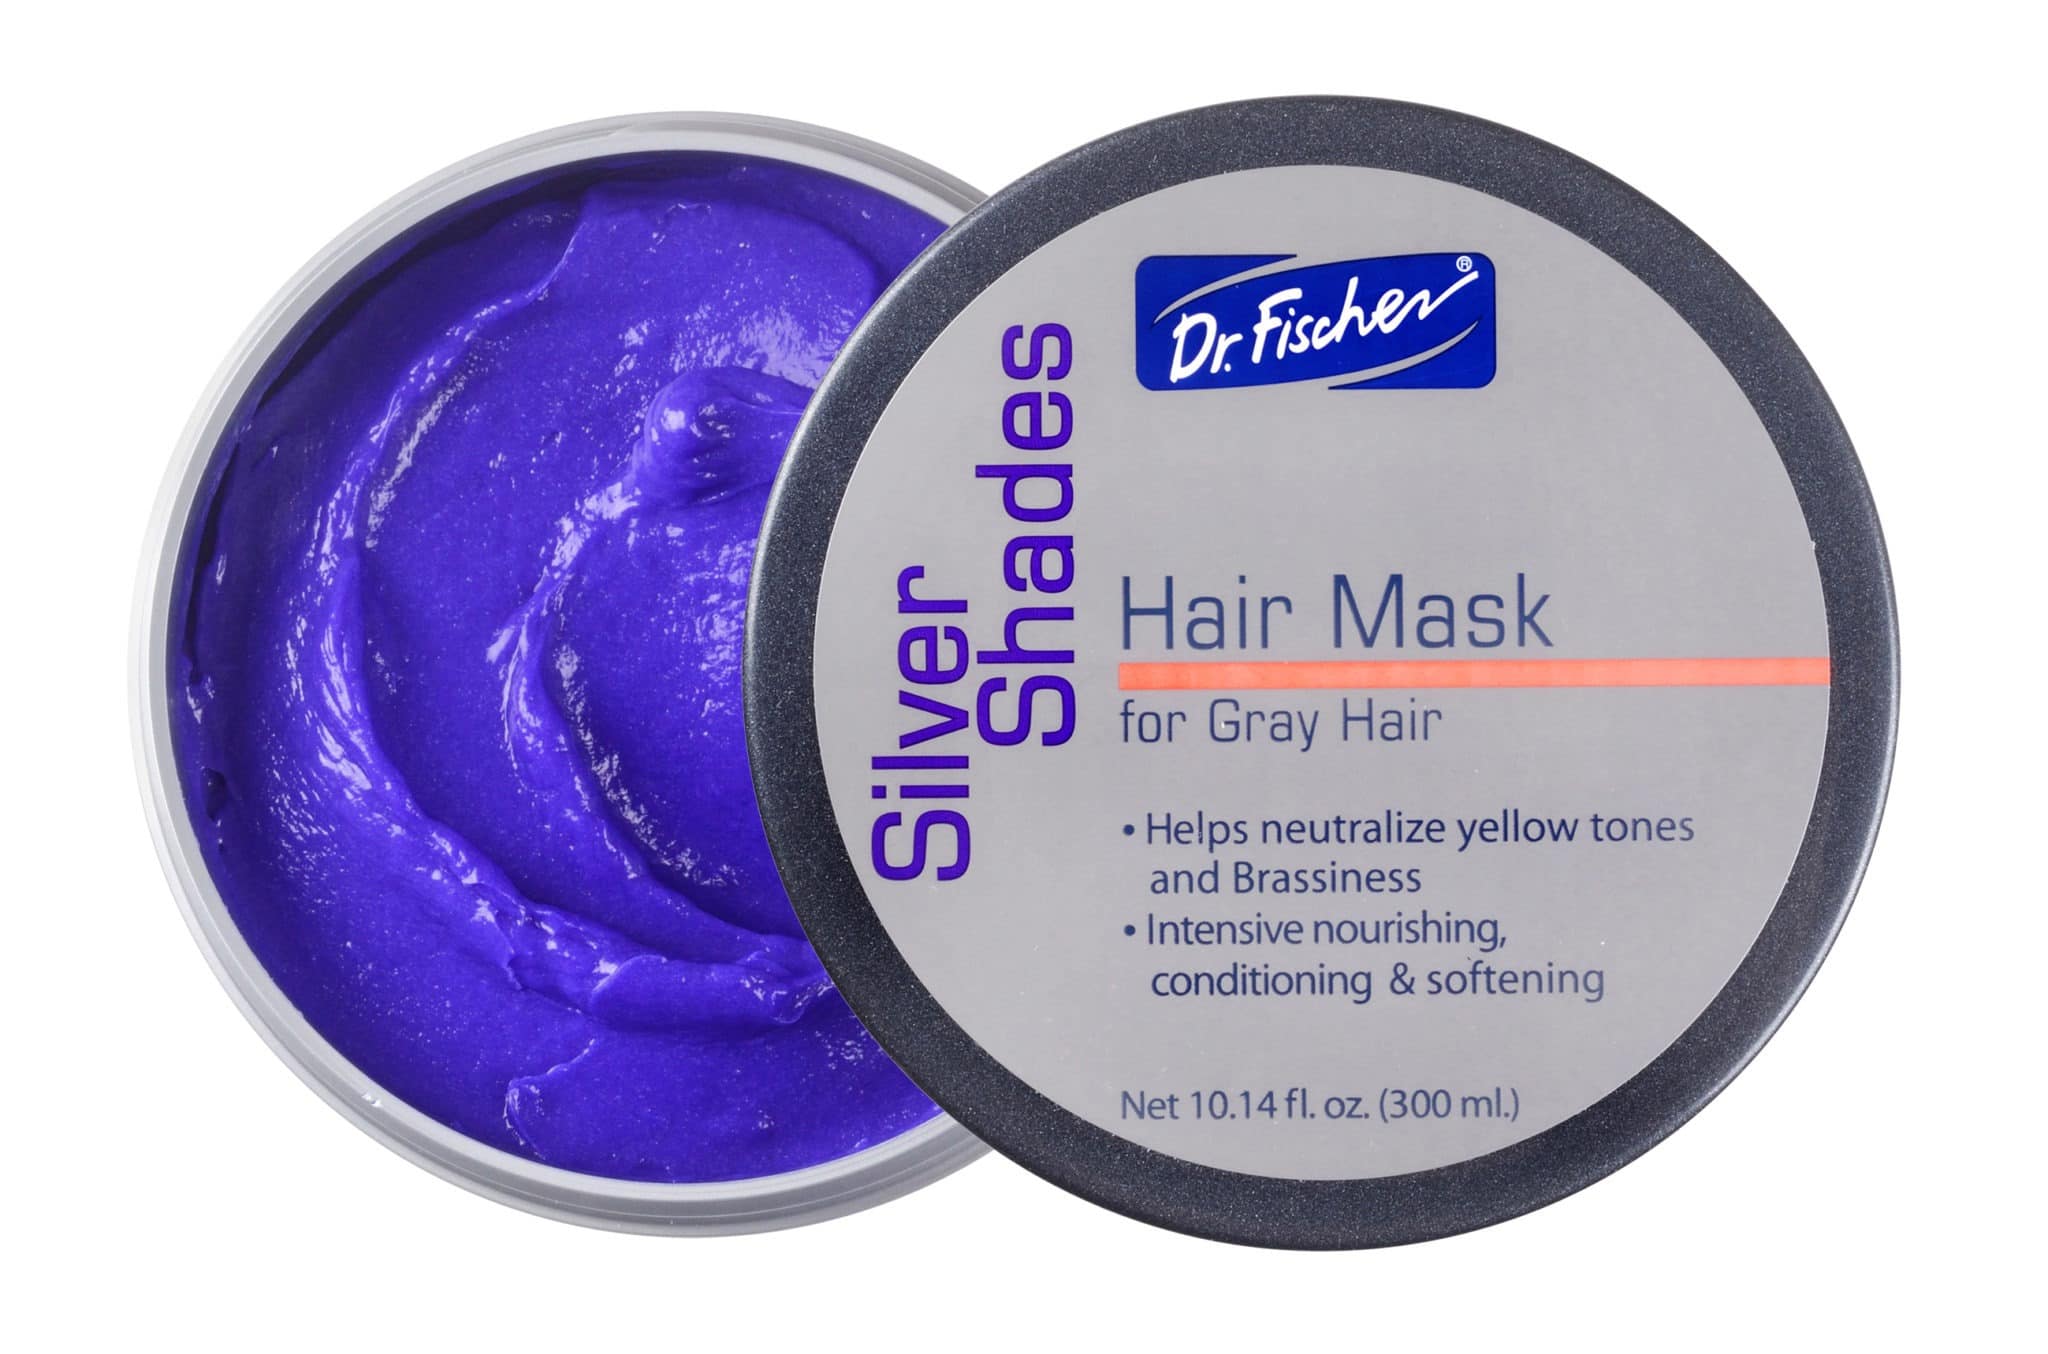 6. Purple Hair Mask for Blonde, Platinum & Silver Hair - Banish Yellow Hues: Blue Masque to Reduce Brassiness & Condition Dry Damaged Hair - Sulfate Free Toner - wide 8